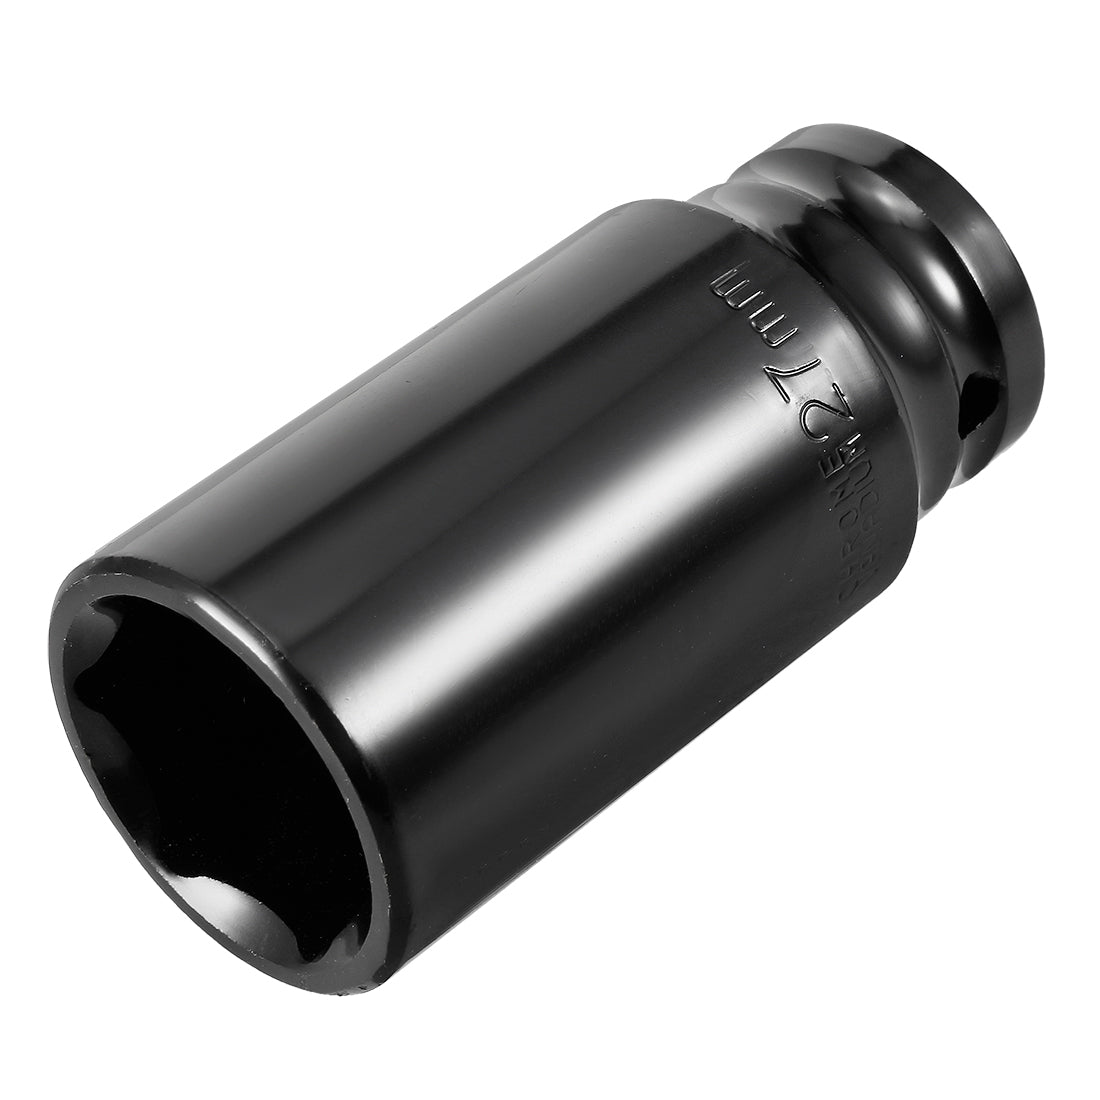 uxcell Uxcell 1/2-Inch Drive by Deep Impact Socket, Cr-V, 6-Point, Metric